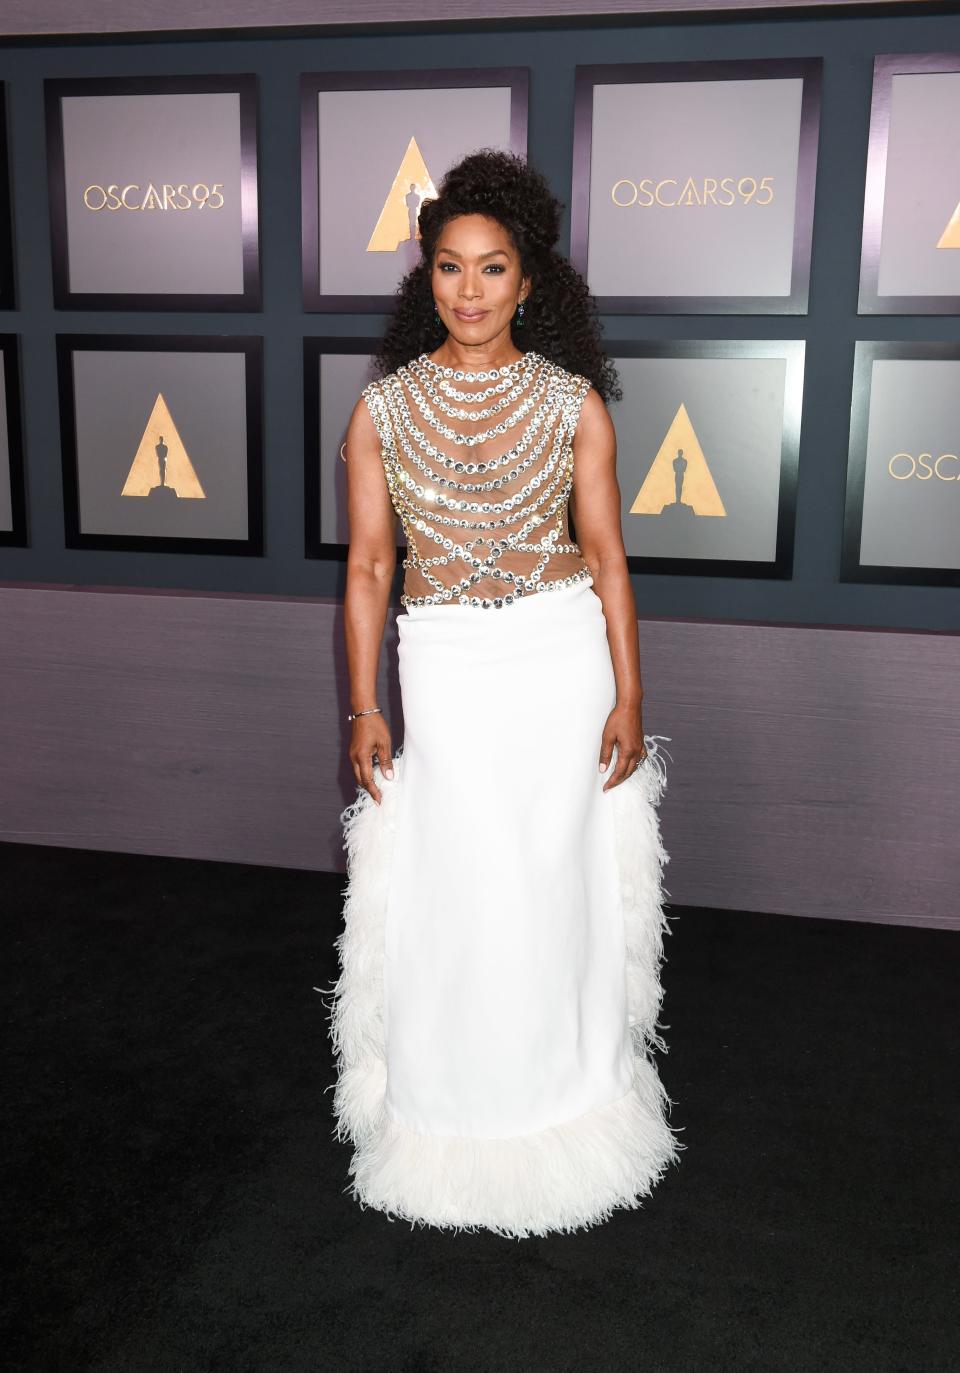 Angela Bassett in a white skirt and a sheer crystal top